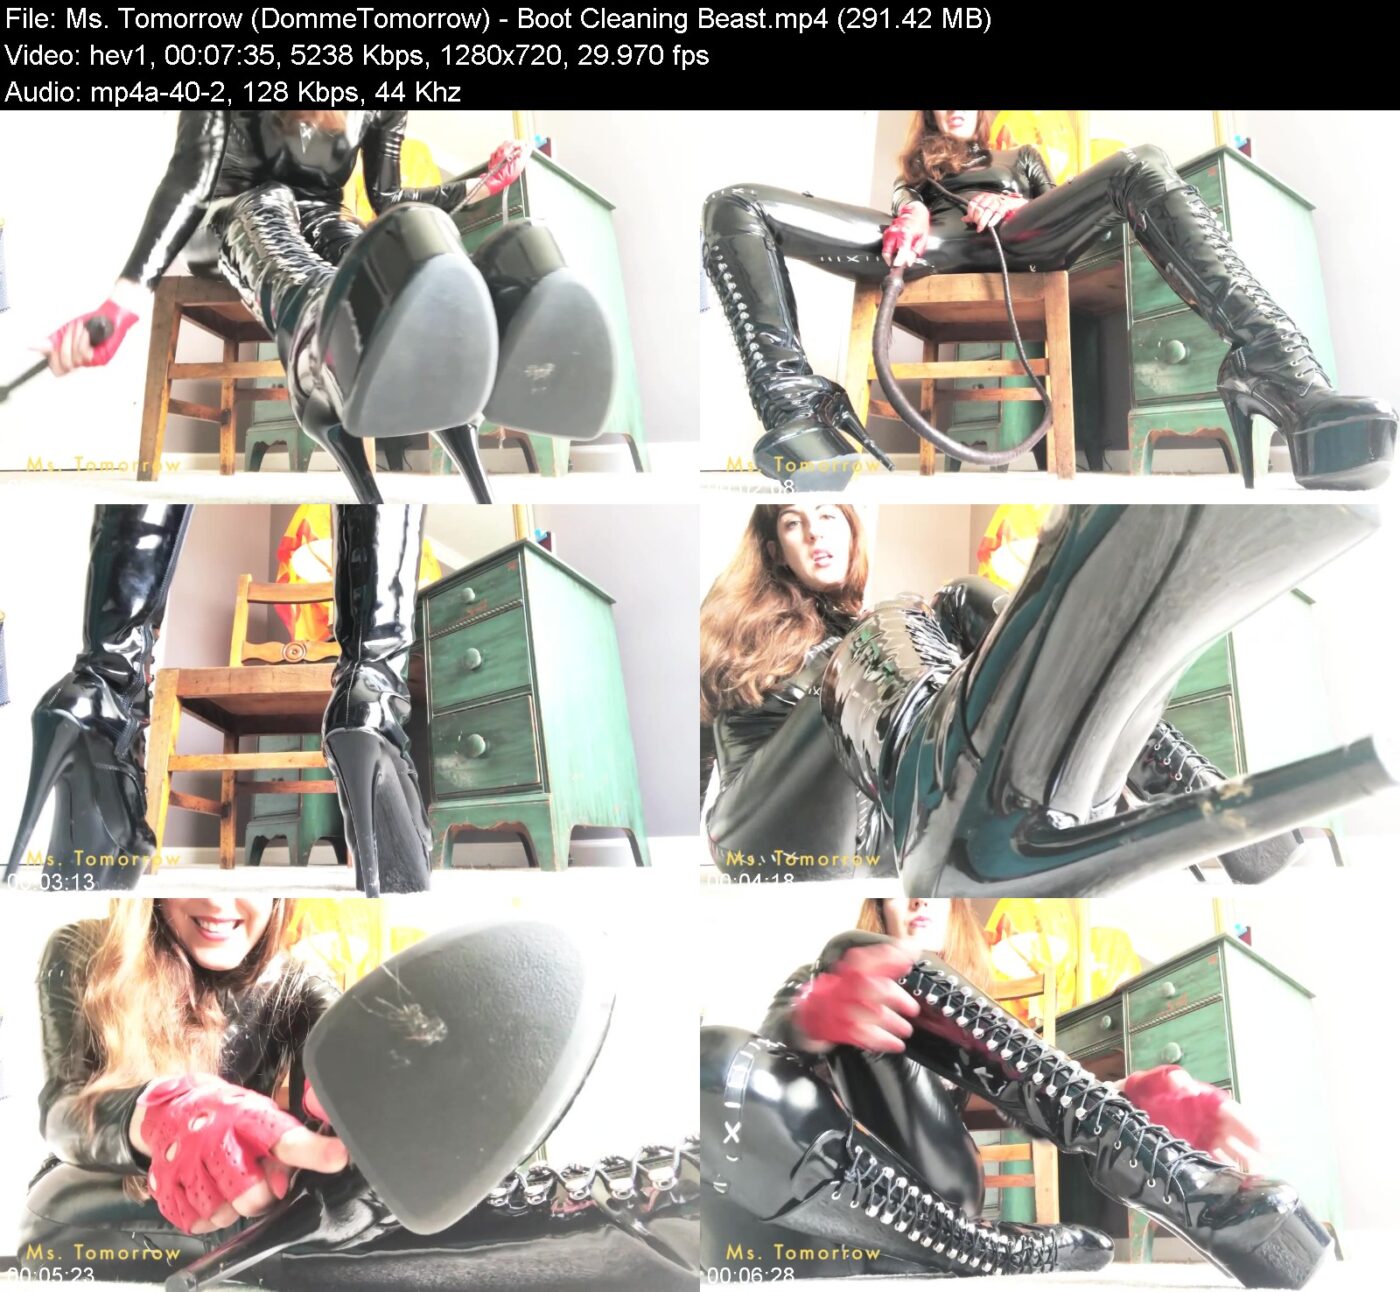 Ms. Tomorrow (DommeTomorrow) - Boot Cleaning Beast